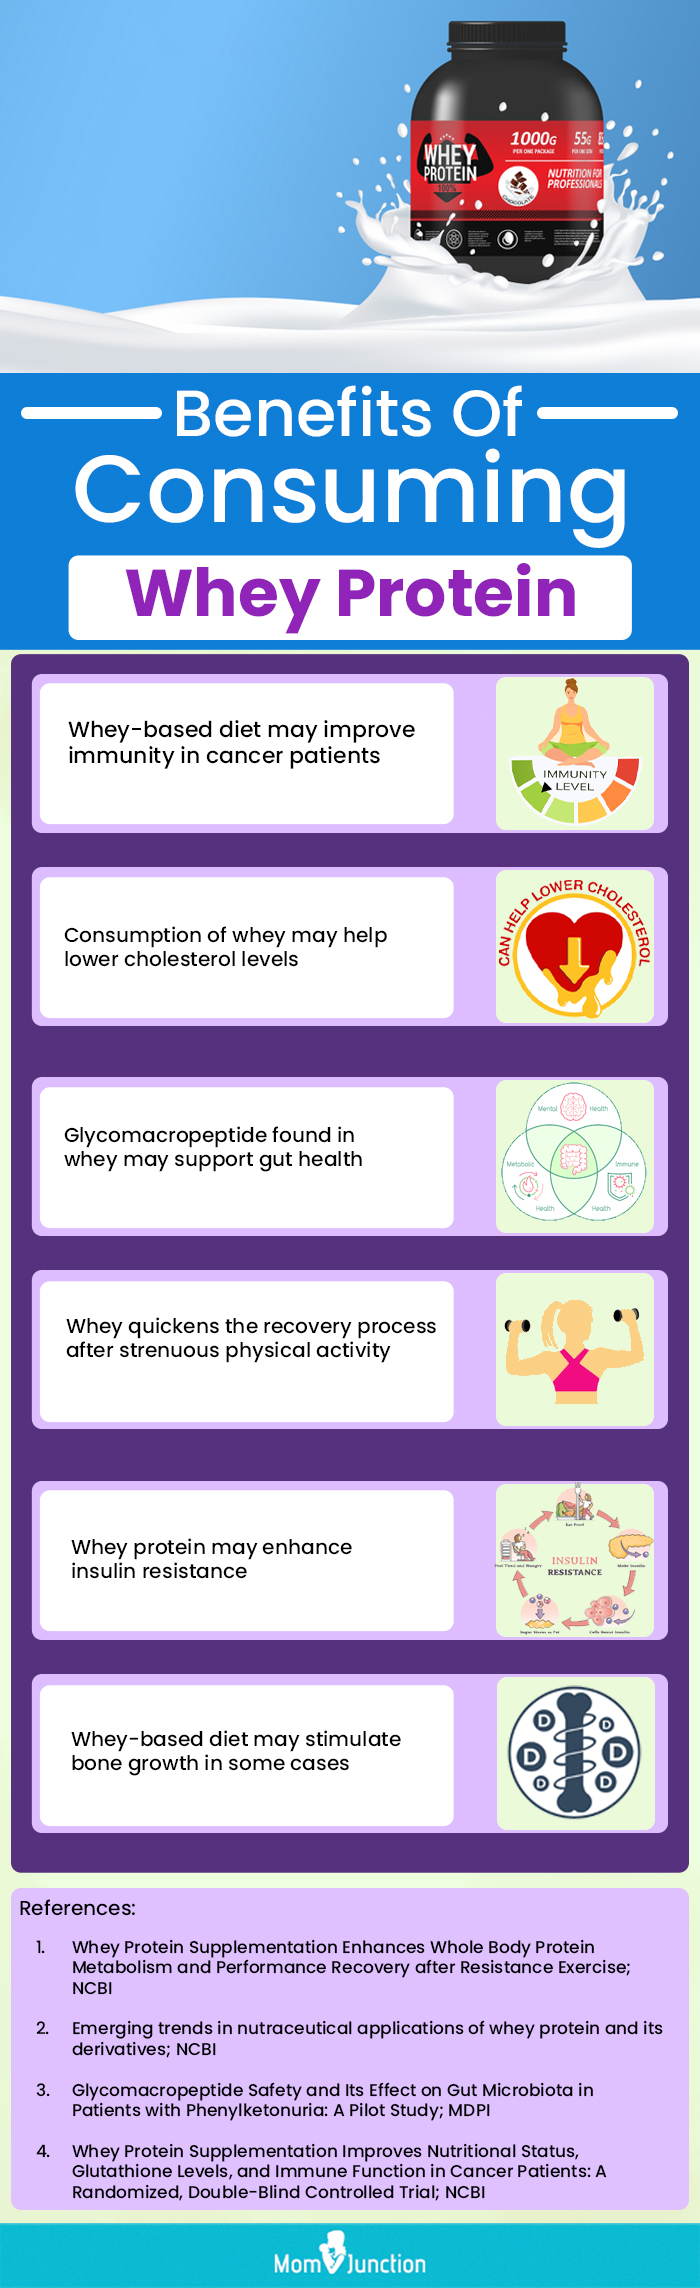 Benefits Of Consuming Whey Protein (infographic)